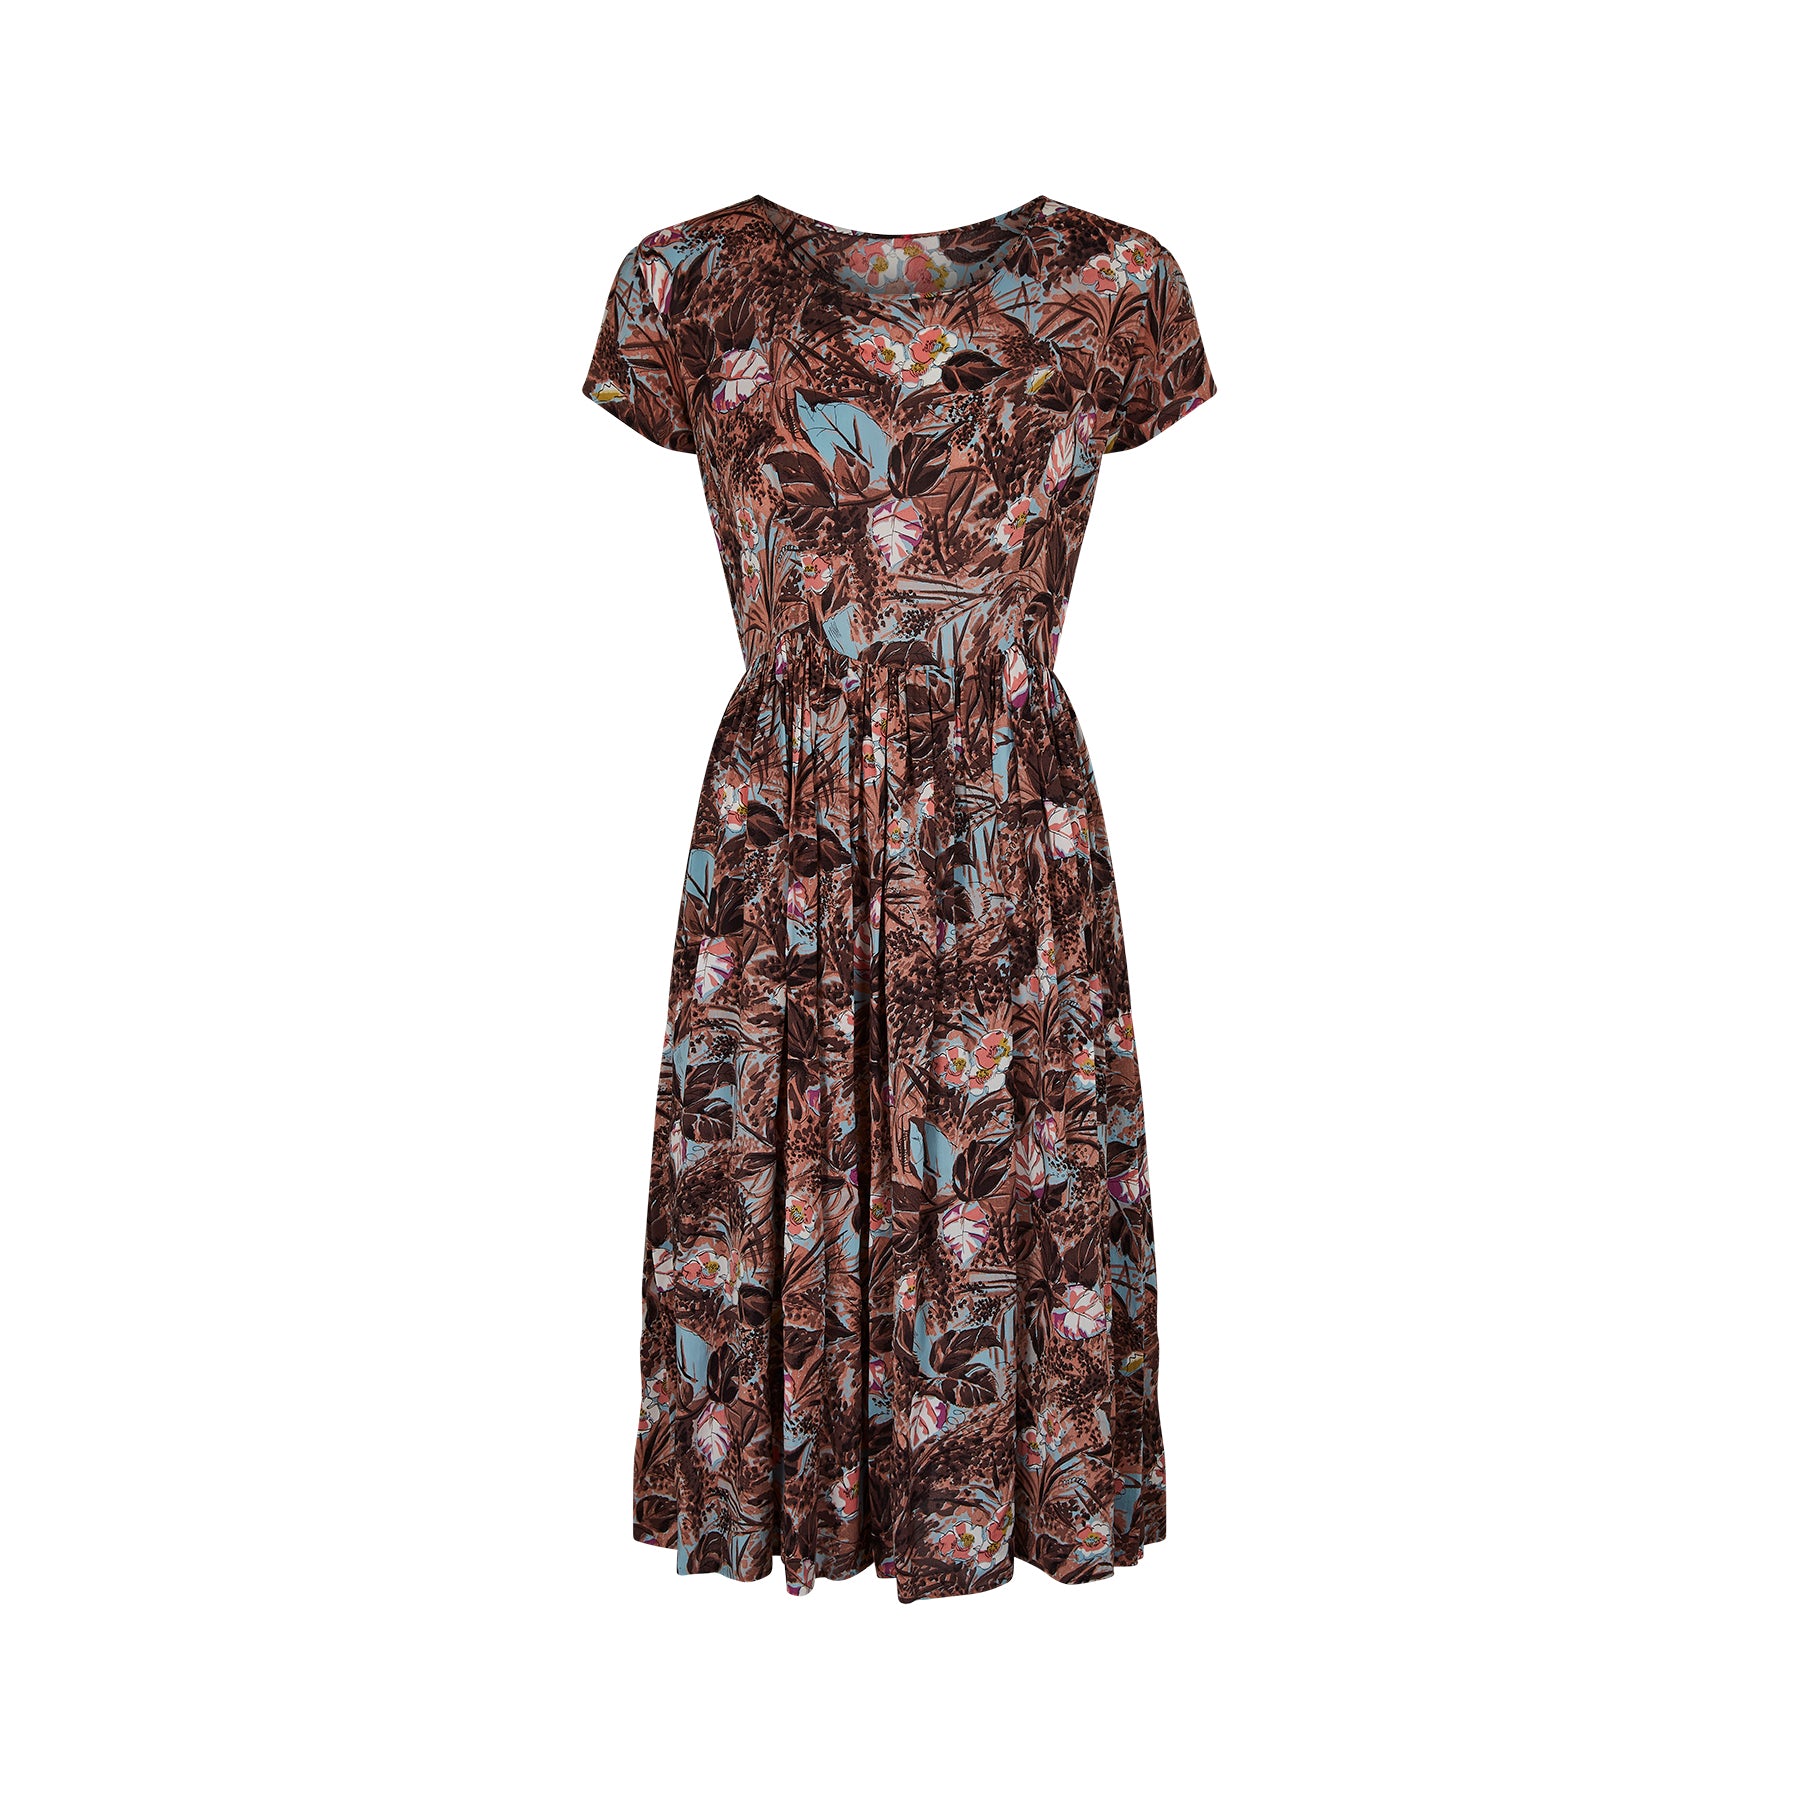 1940s Cold Rayon Floral Print Dress